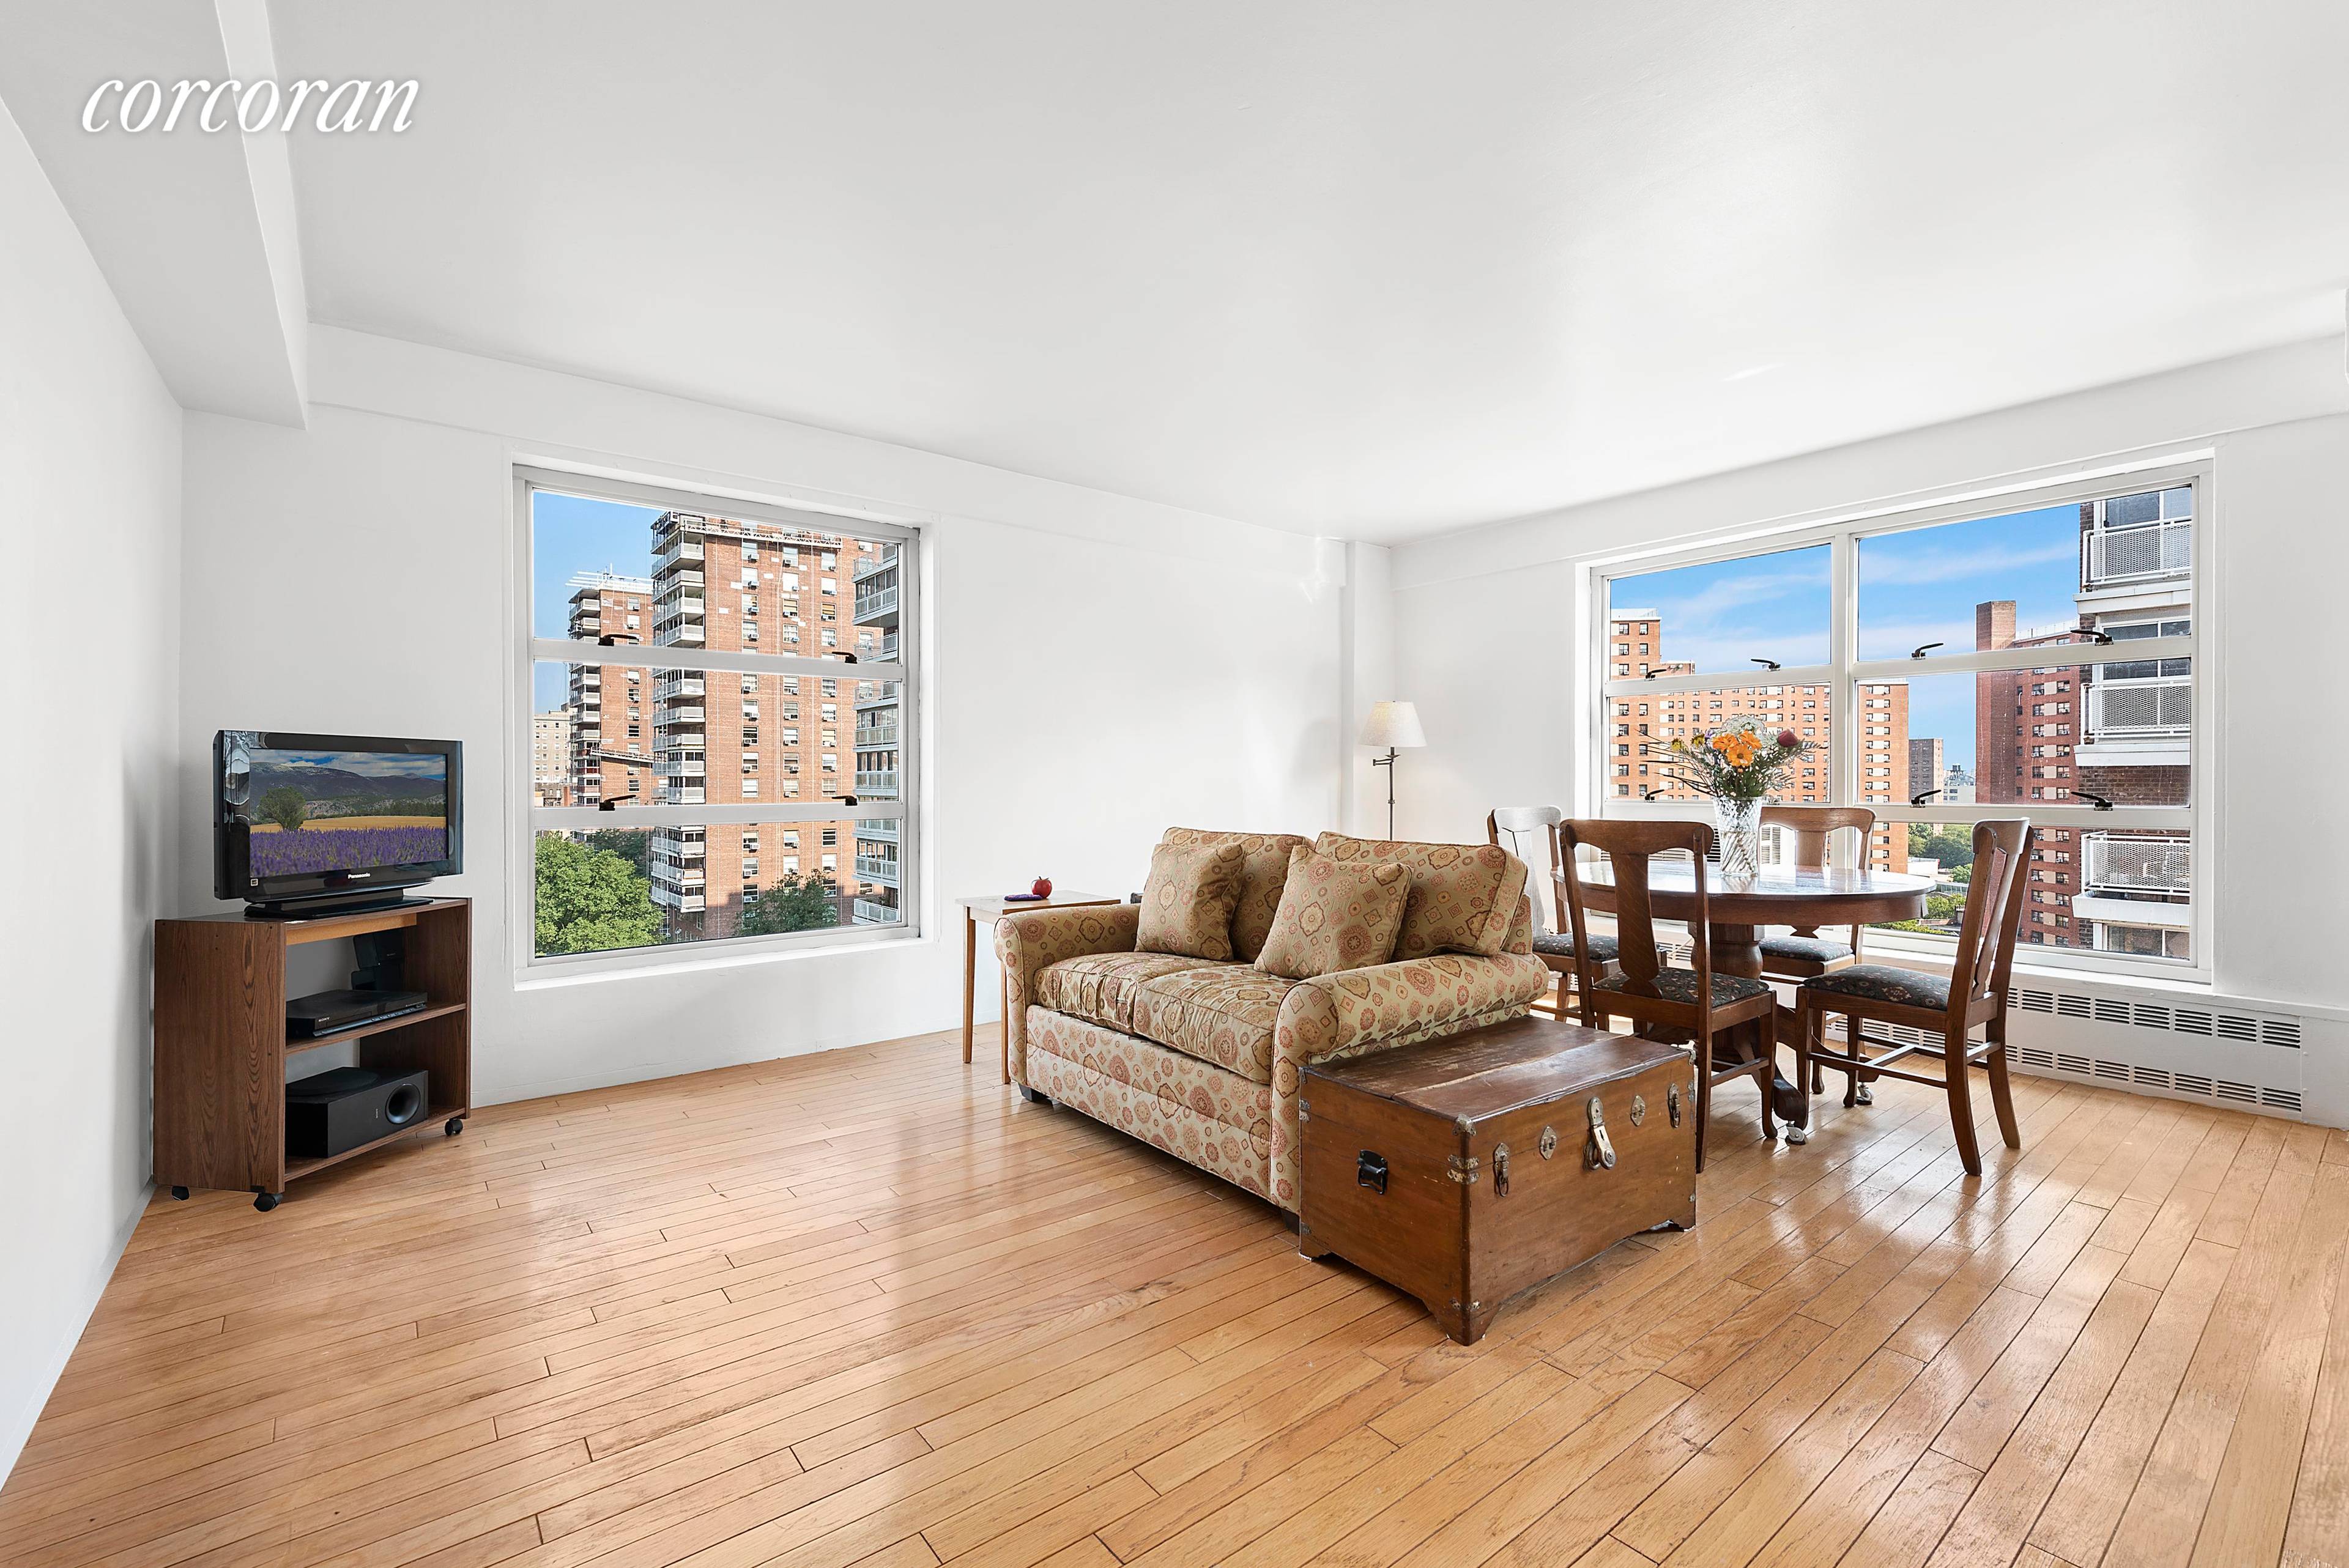 A View from The Top ! This spacious two bedroom one bath apartment 11th floor gem boasts a BREATHTAKING CLASSIC New York City view situated in the middle of lush ...